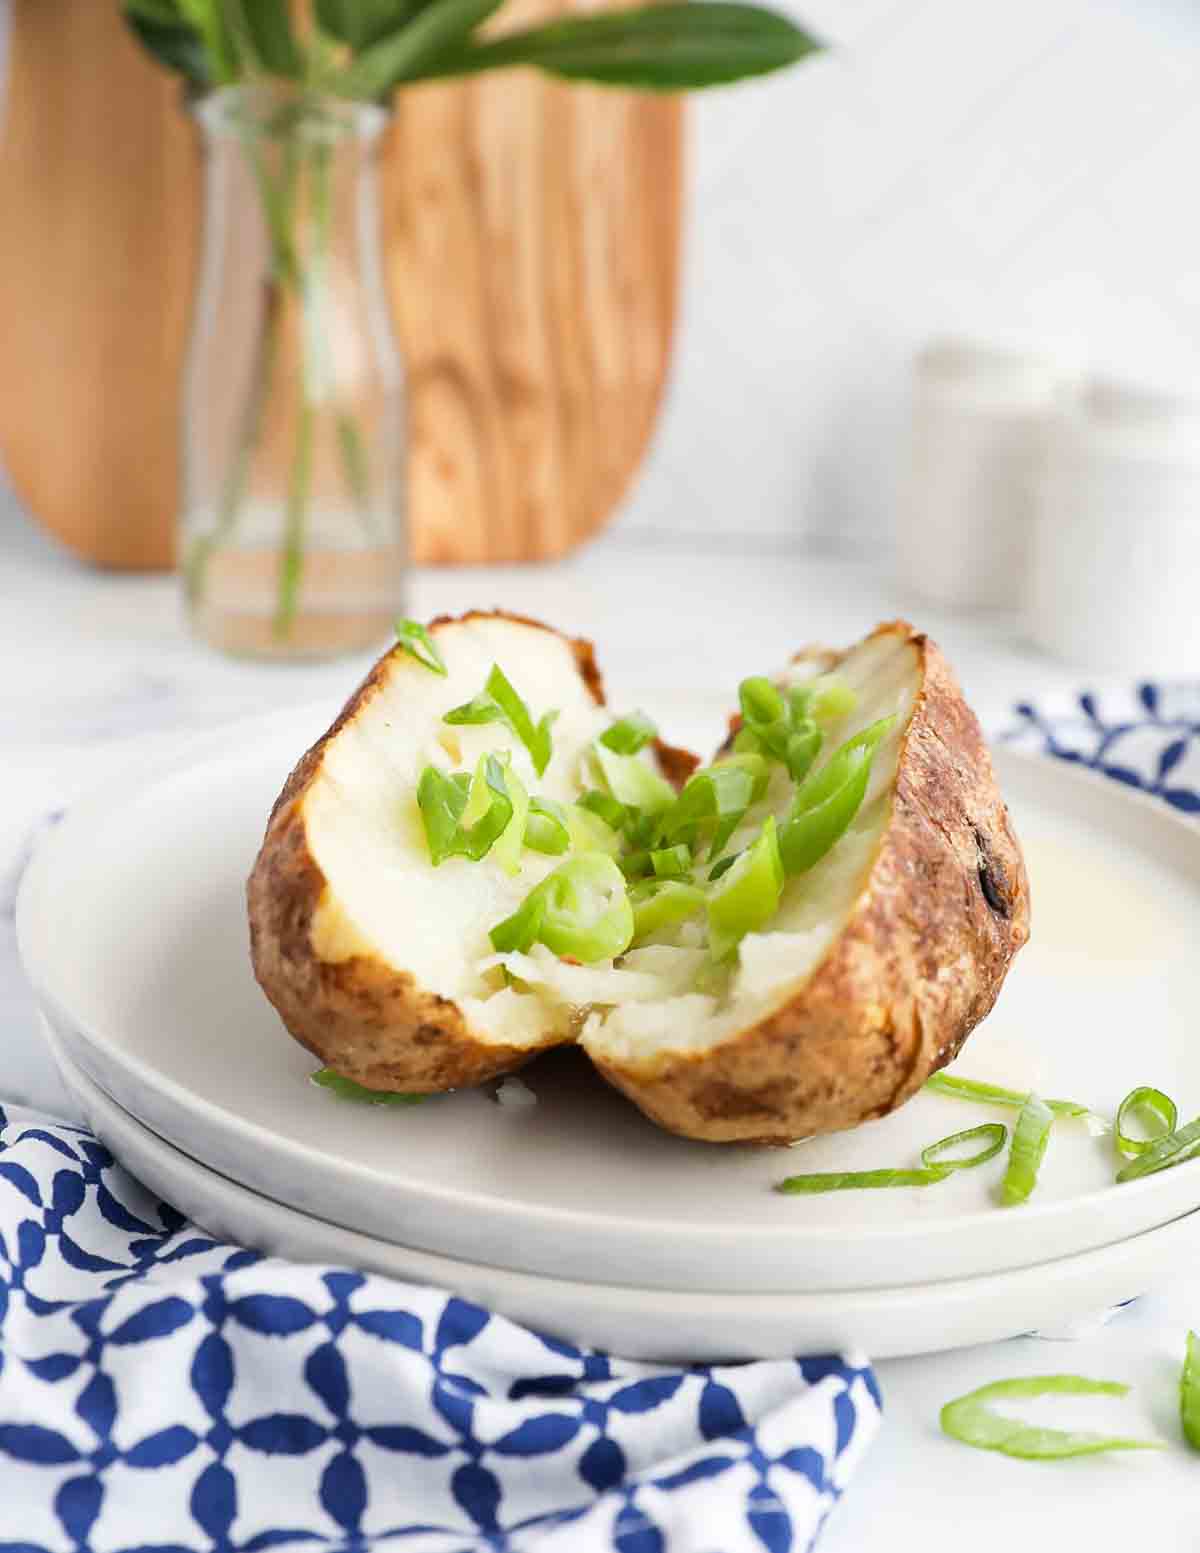 A sliced baked potato covered in sliced green onions on two stacked white plates.